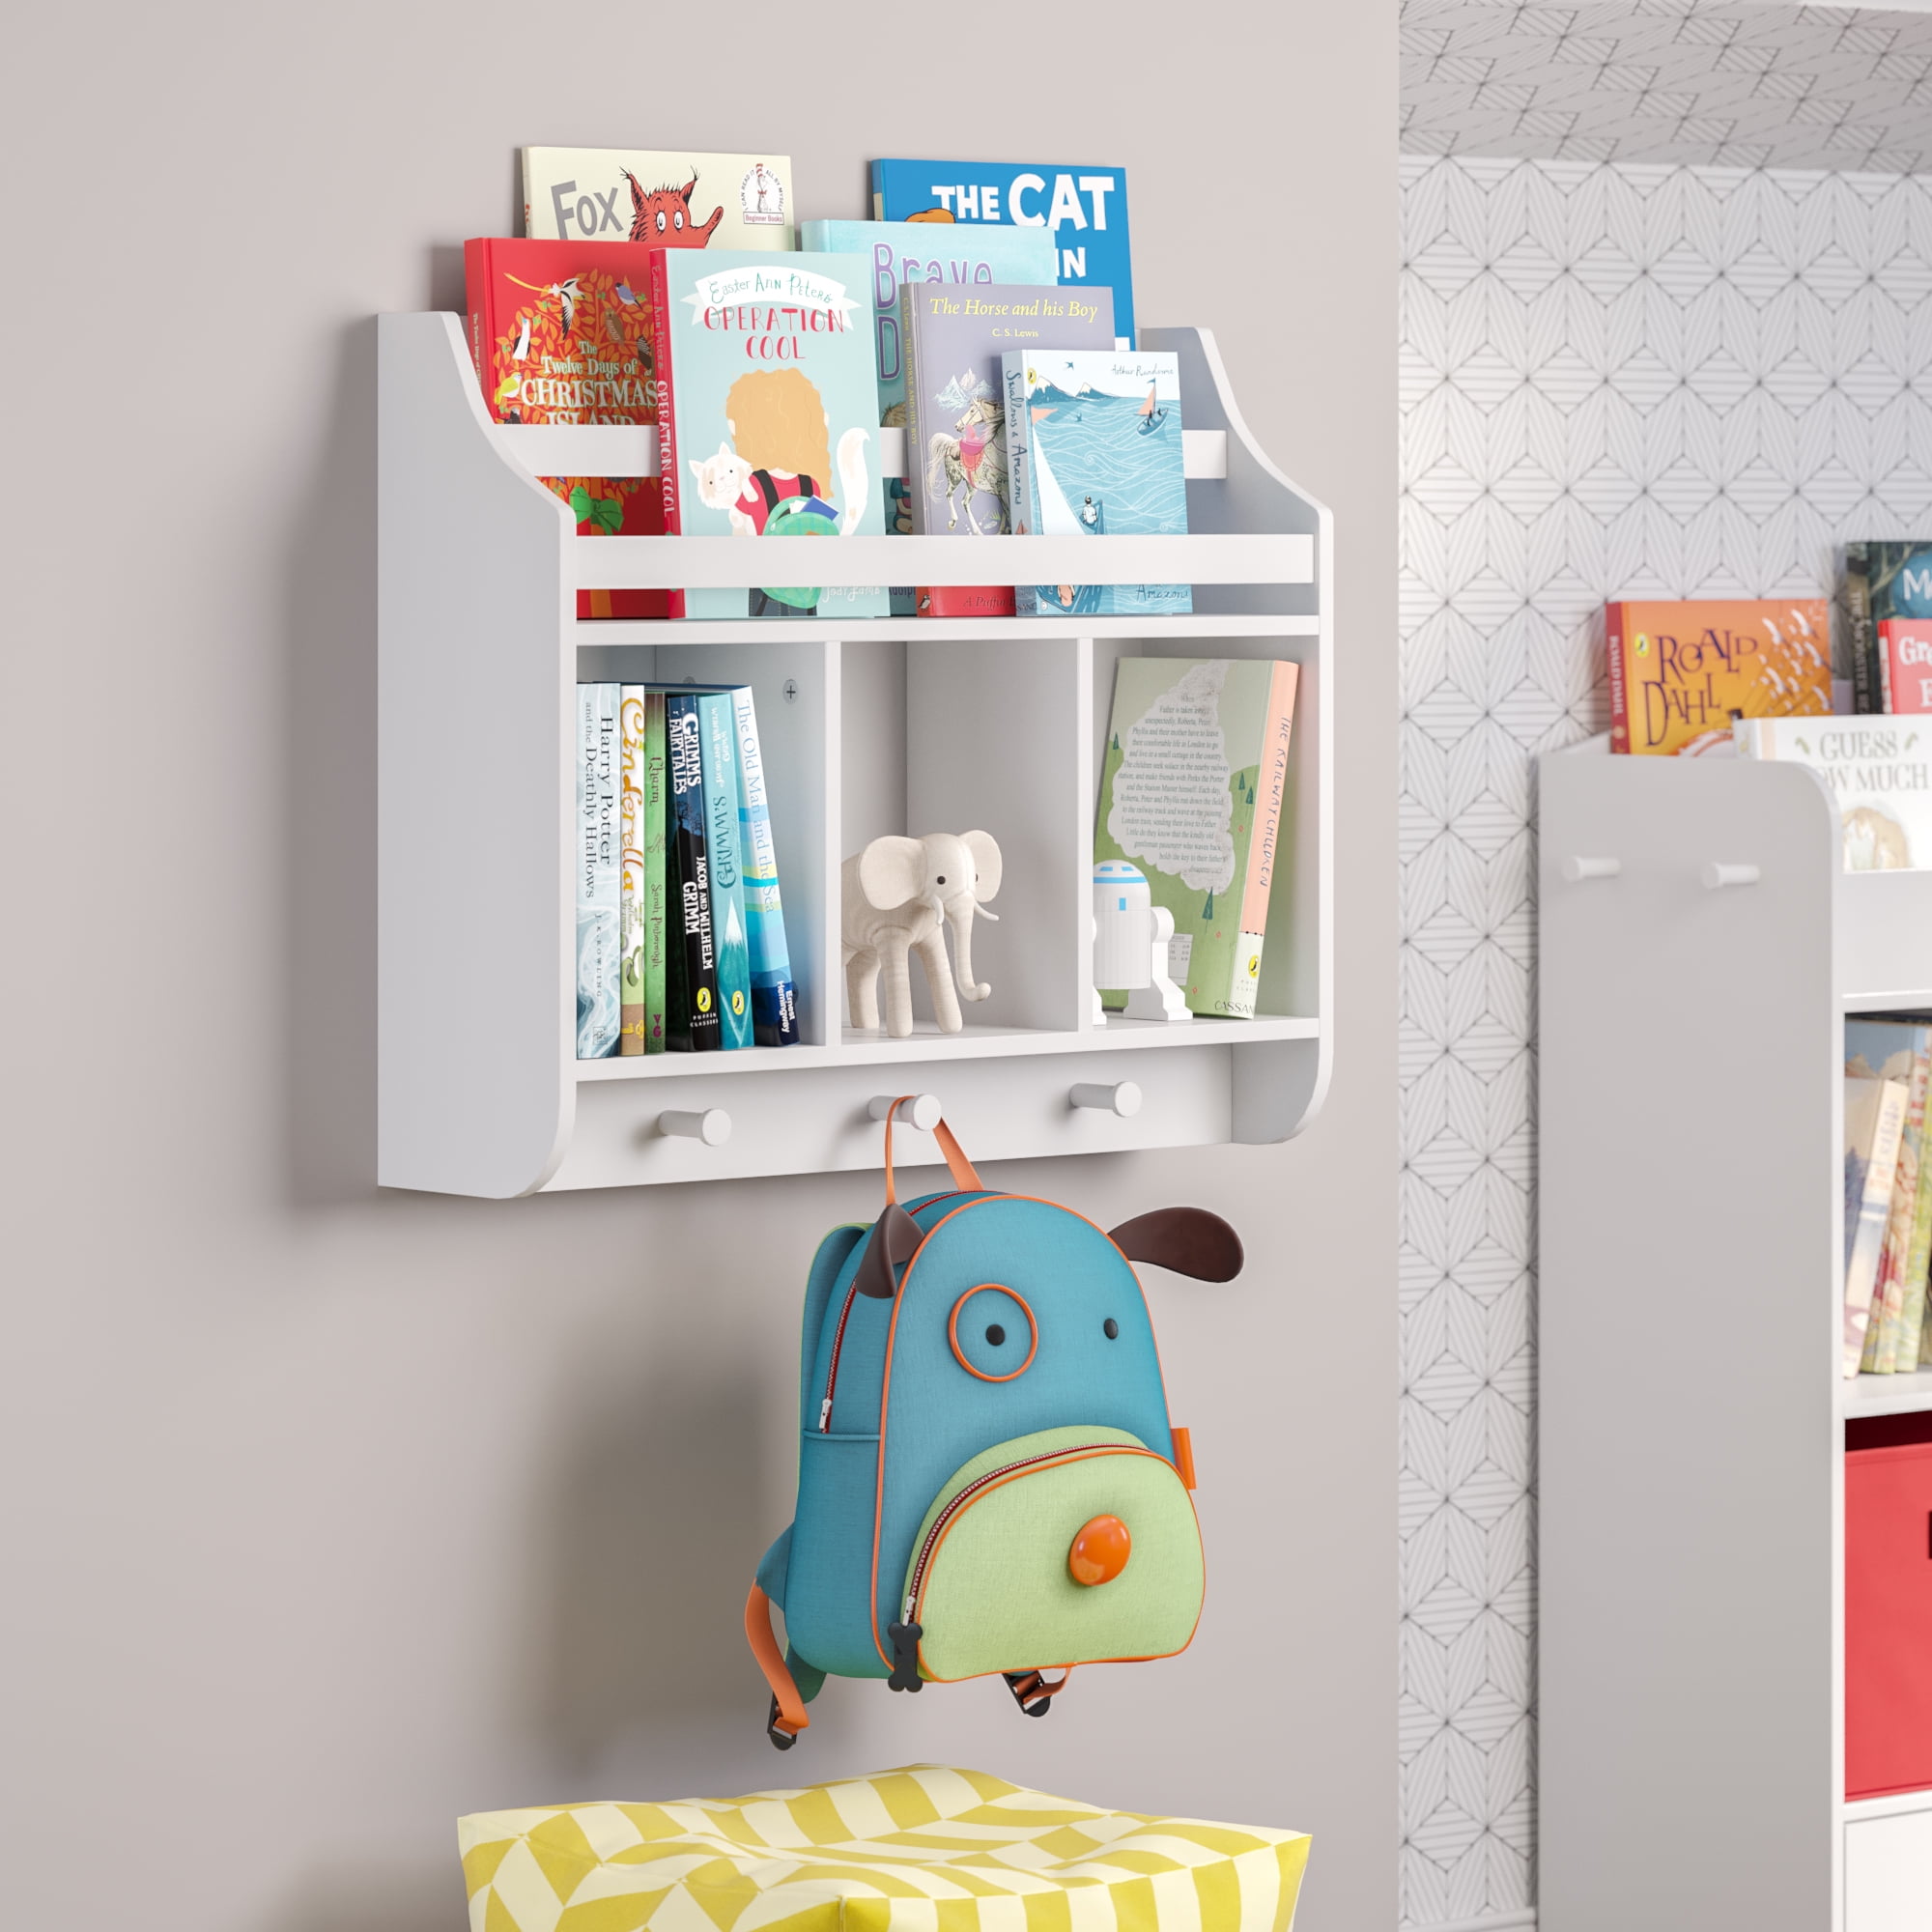 RiverRidge Home Book Nook Collection Kids Cubby Bookshelves Storage Tower White